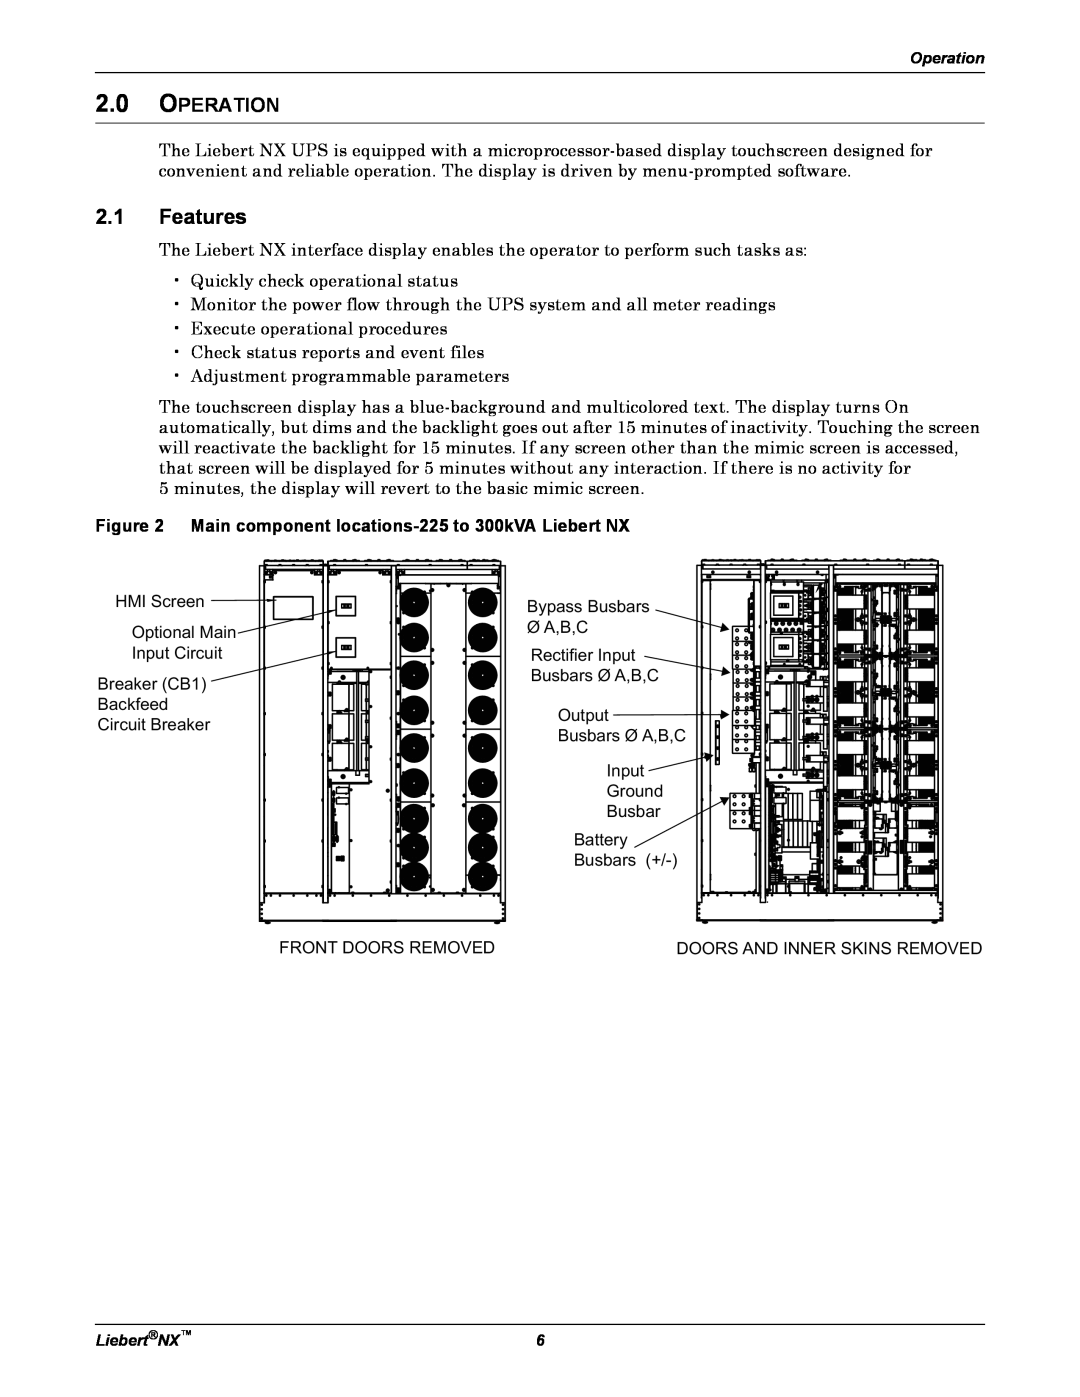 Emerson NX manual Features, Operation 